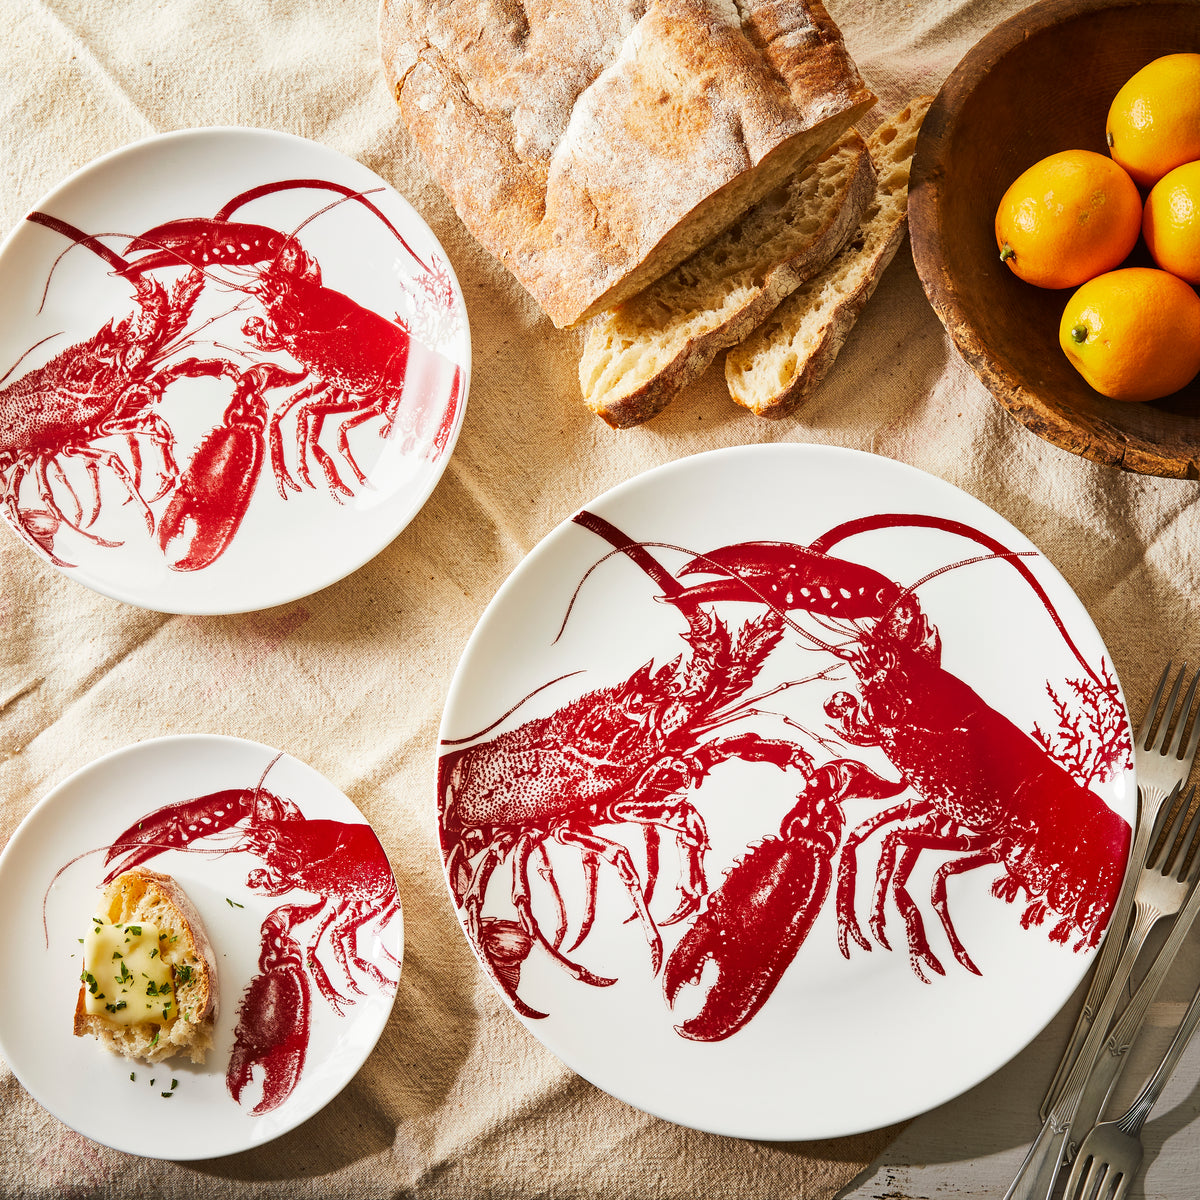 A set of three Caskata Artisanal Home Lobster Red Small Plates with red designs, a bowl of oranges, bread, and a small dish with bread and spread are arranged on a cream tablecloth with silverware nearby, evoking a seaside style.